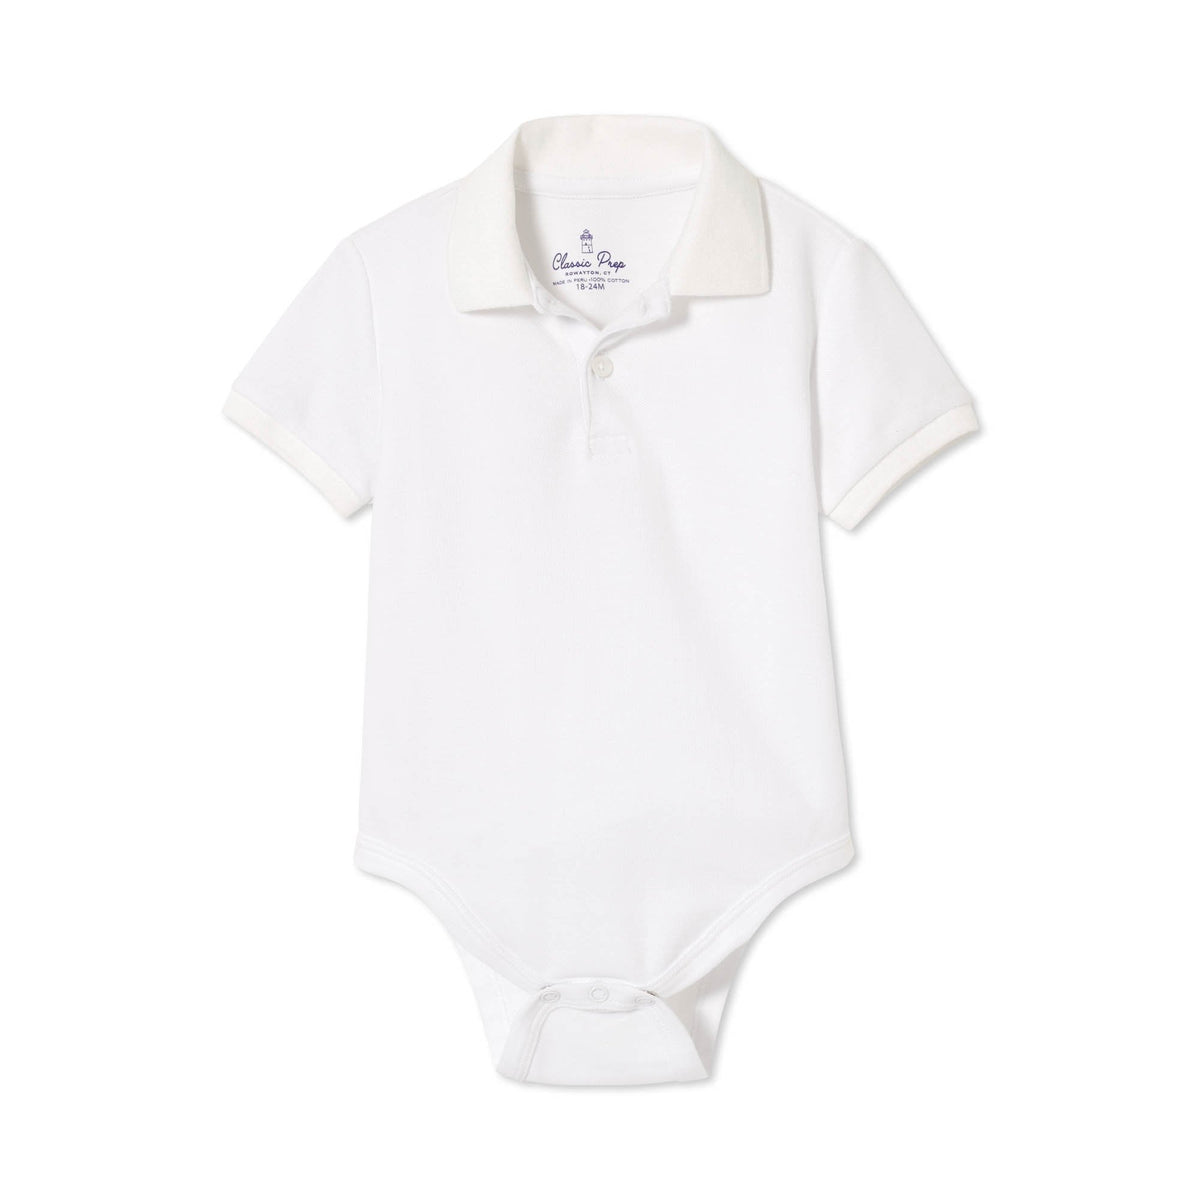 Classic and Preppy Short Sleeve Hugh Polo Onesie, Bright White Pique-Baby Rompers-Bright White-0-3M-CPC - Classic Prep Childrenswear